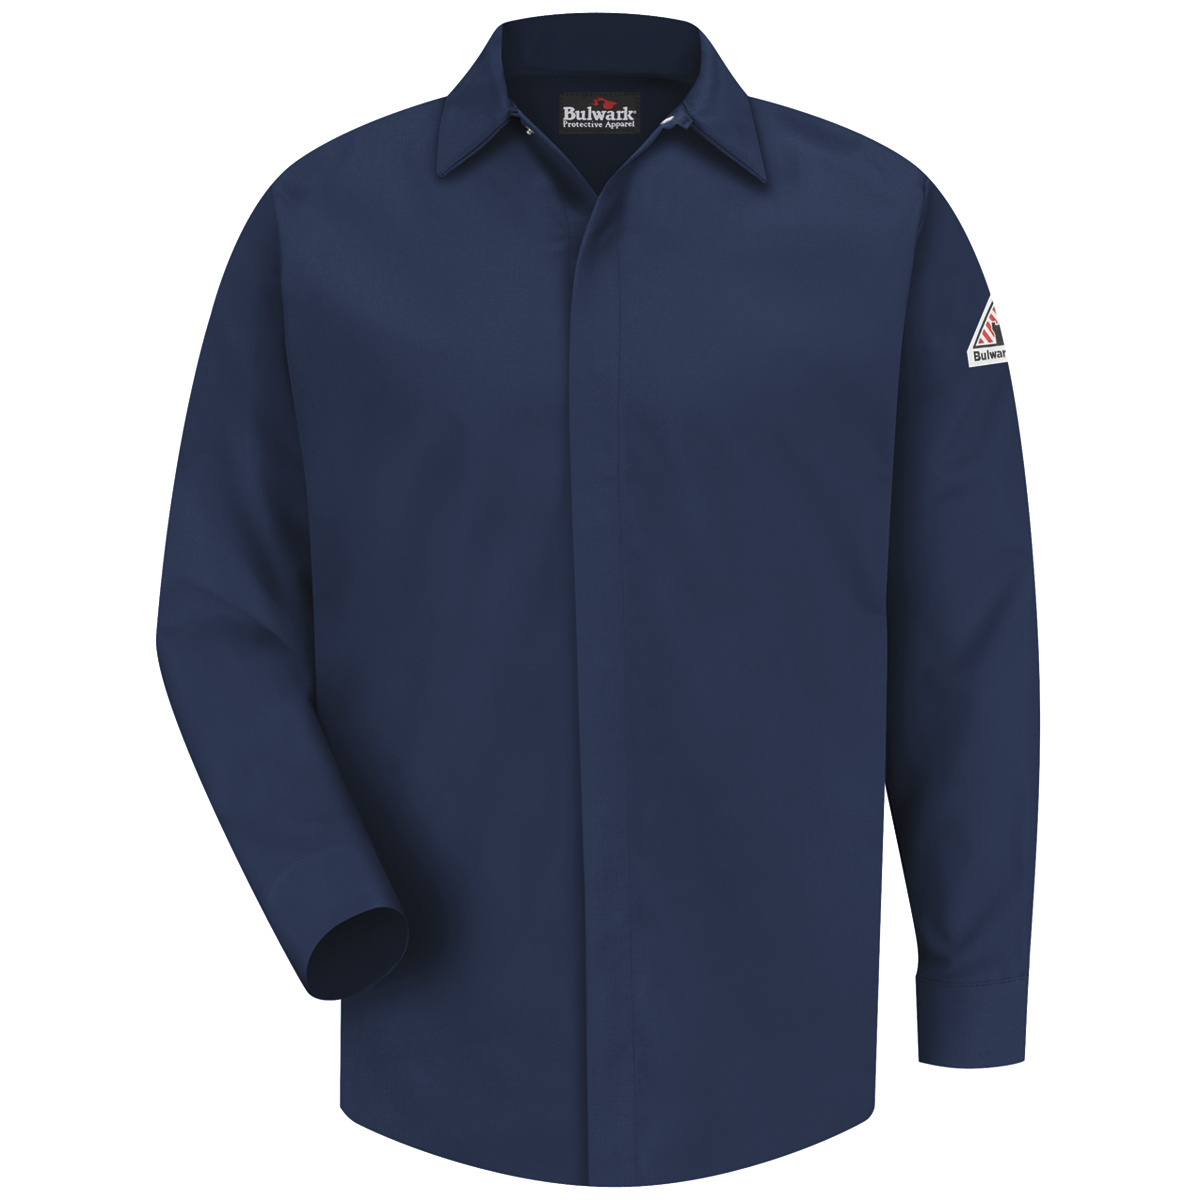 Bulwark® X-Large Regular Navy Blue Westex Ultrasoft®/Cotton/Nylon Flame Resistant Work Shirt With Gripper Front Closure